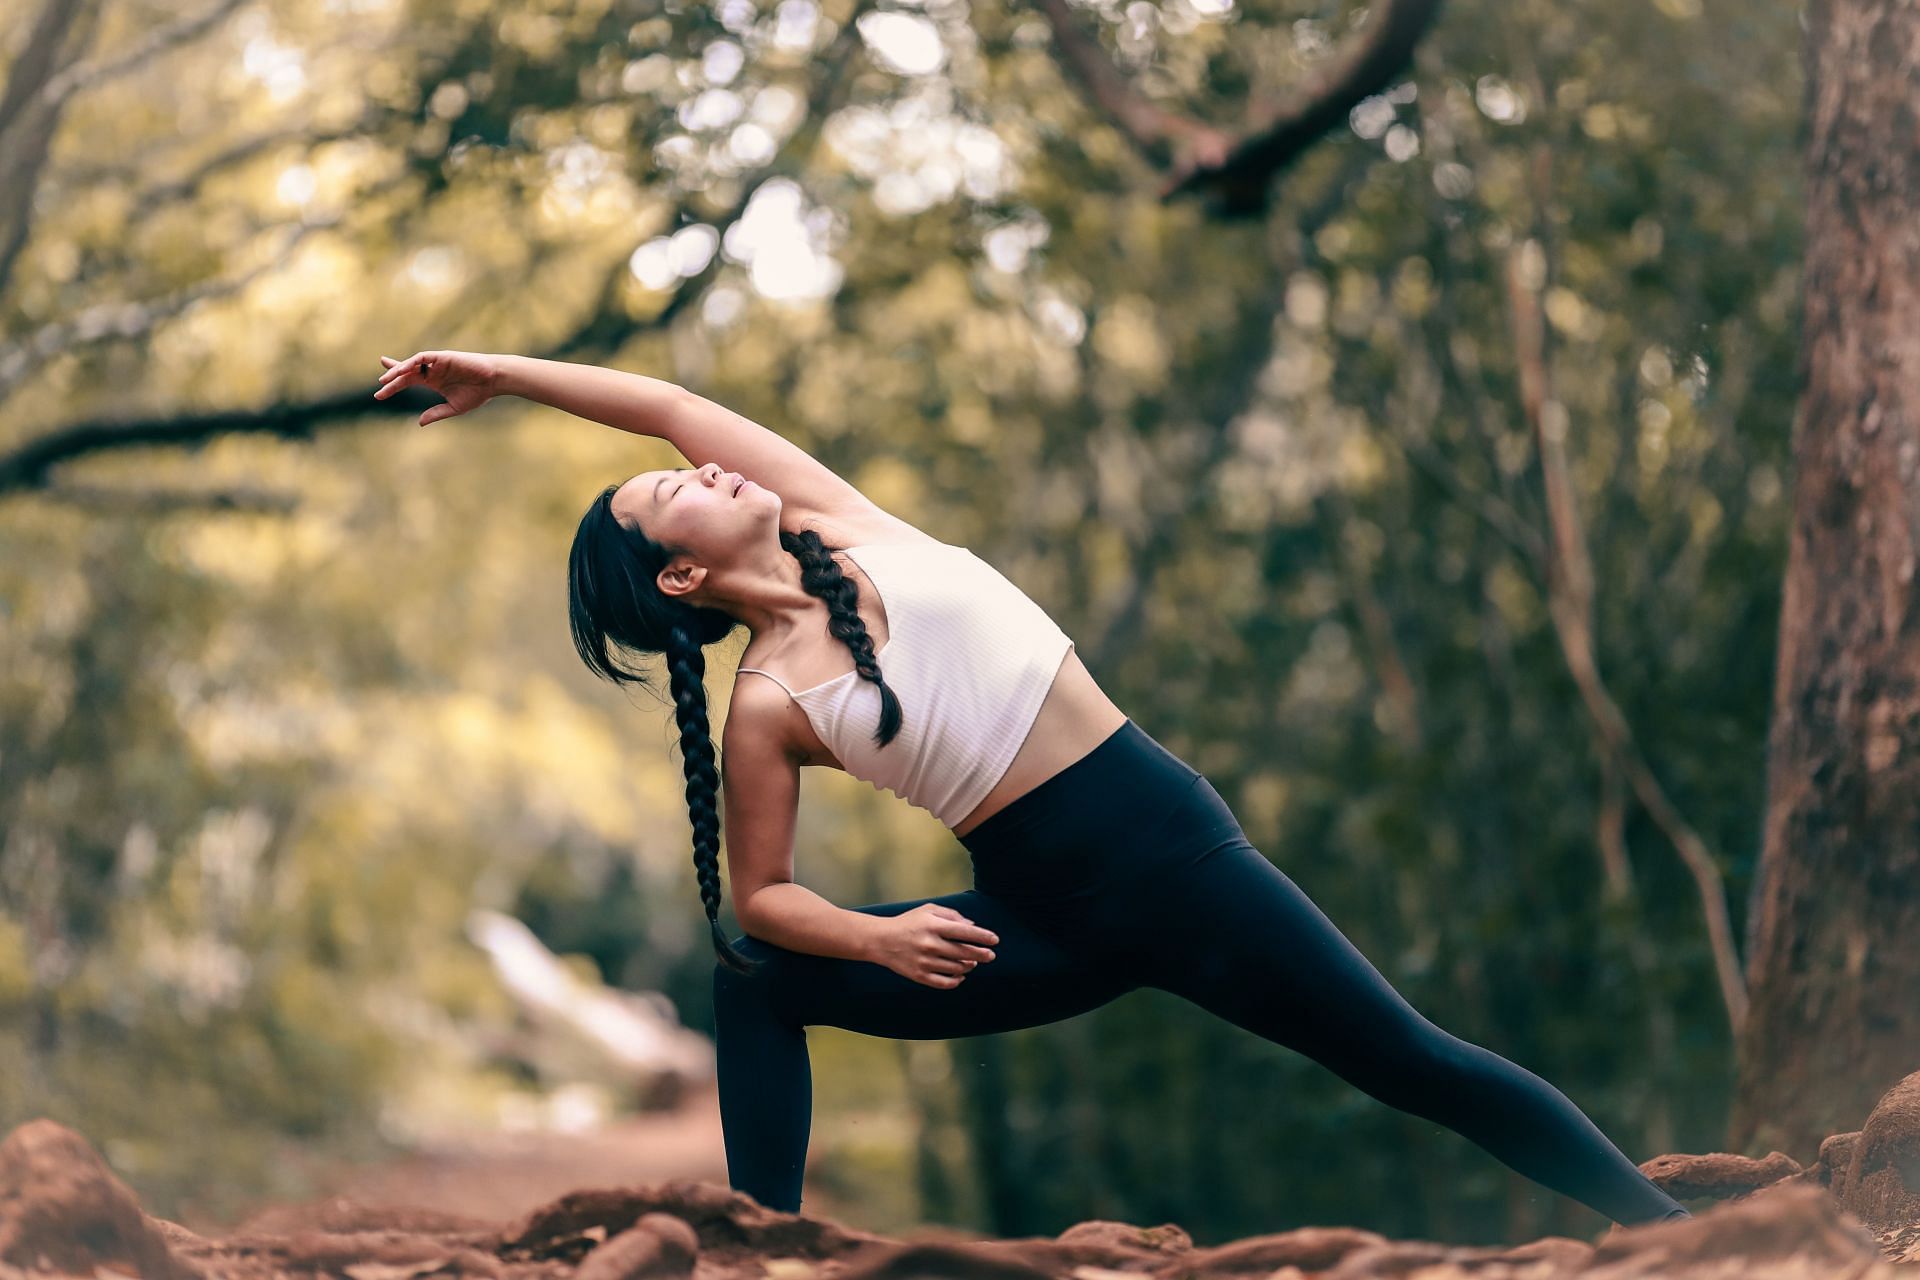 The quality of life for persons who live with ulcerative colitis may be improved by practicing yoga. (Image via Unsplash/ Luemen Rutkowski)